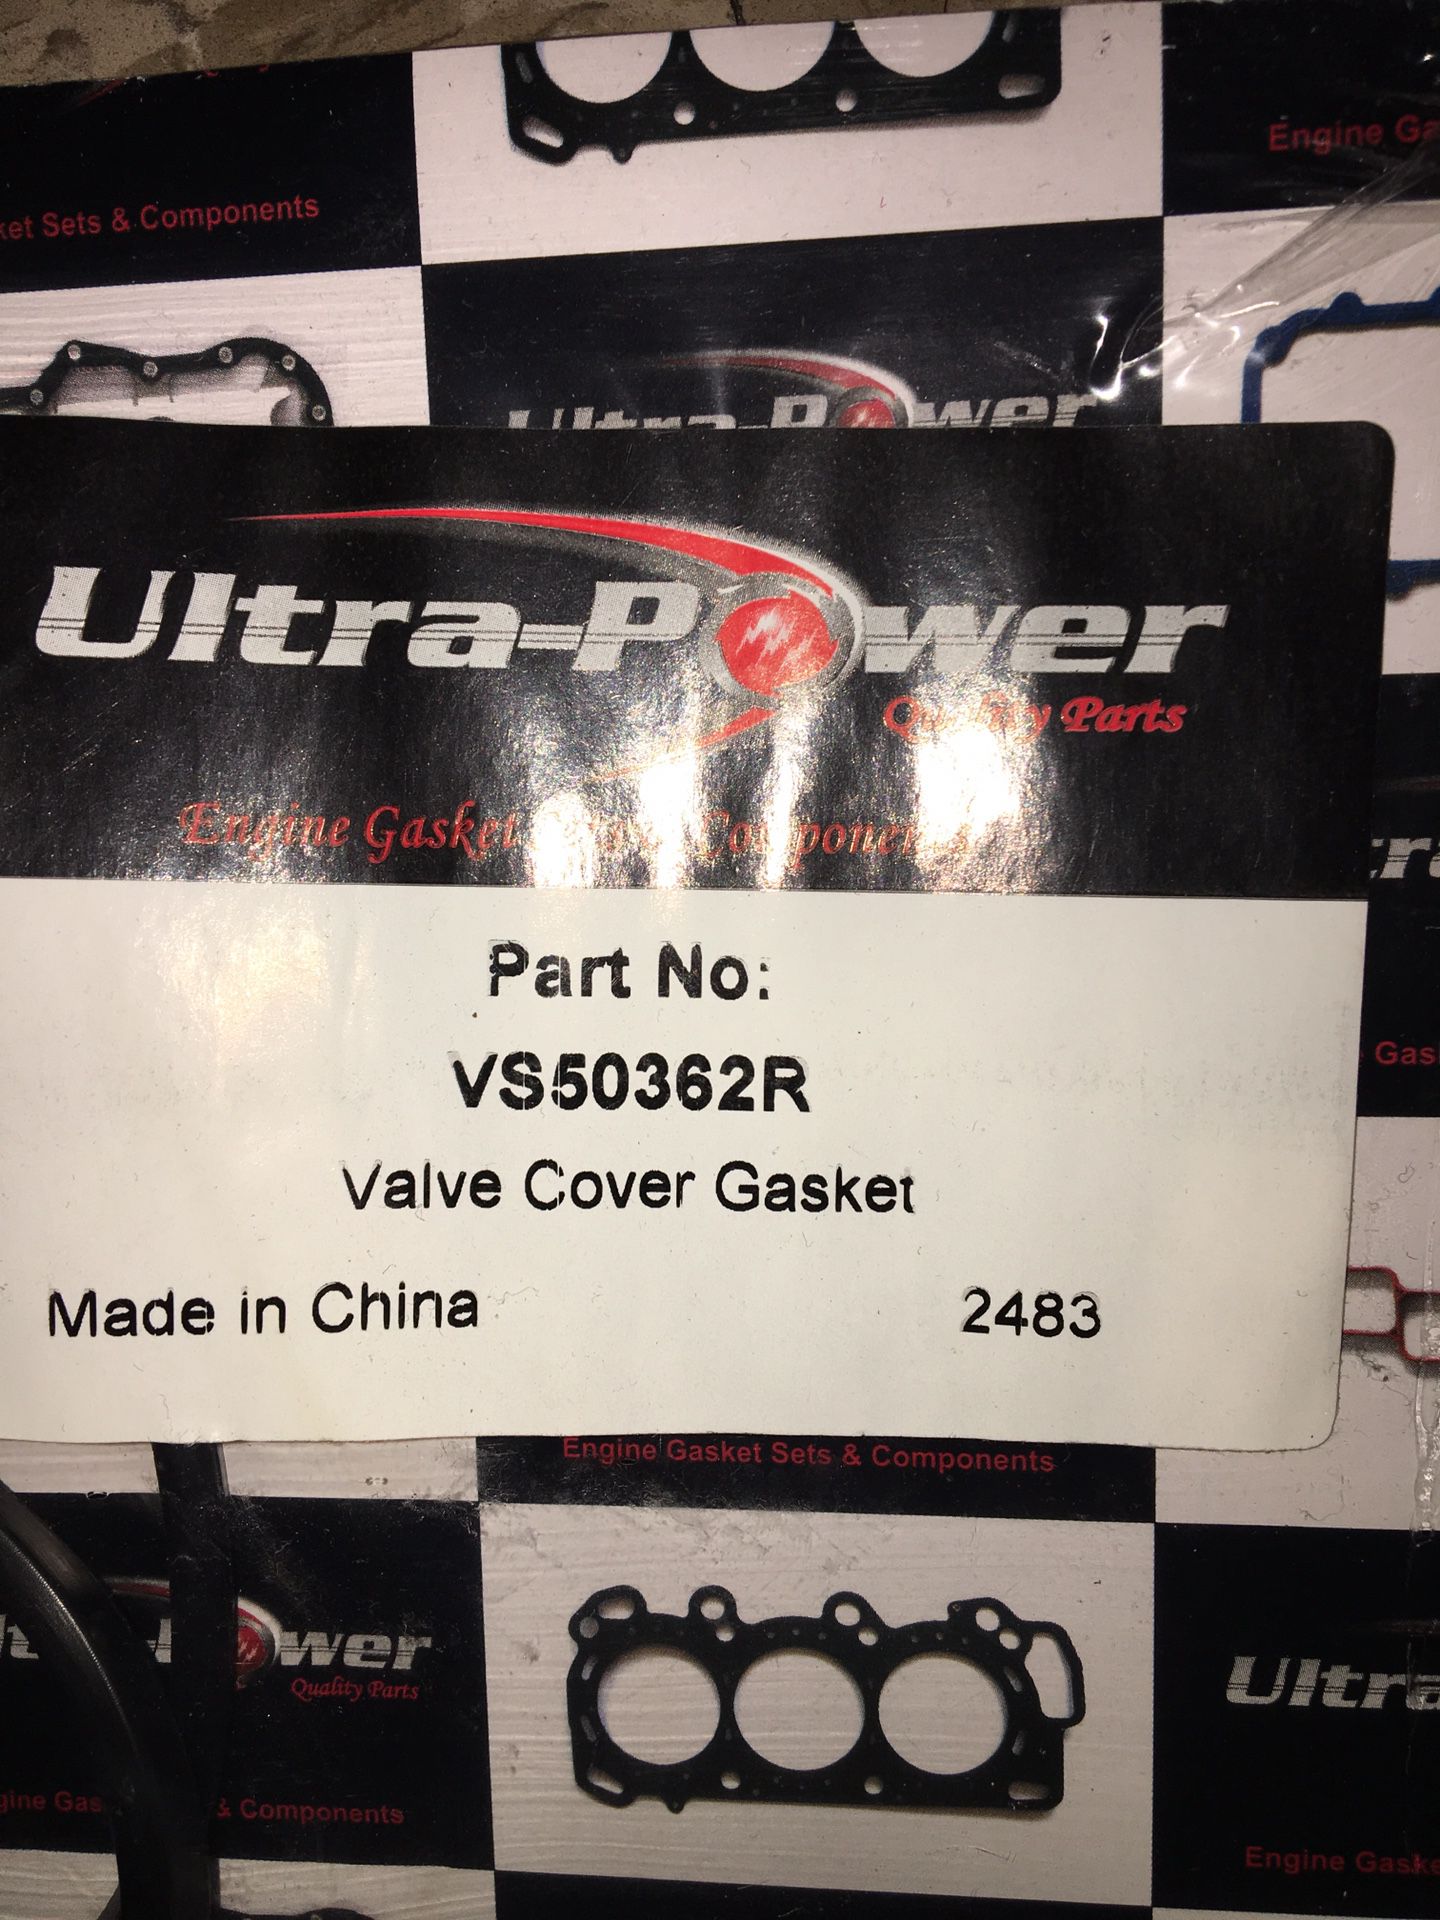 Valve cover gasket for 1995 Acura integra